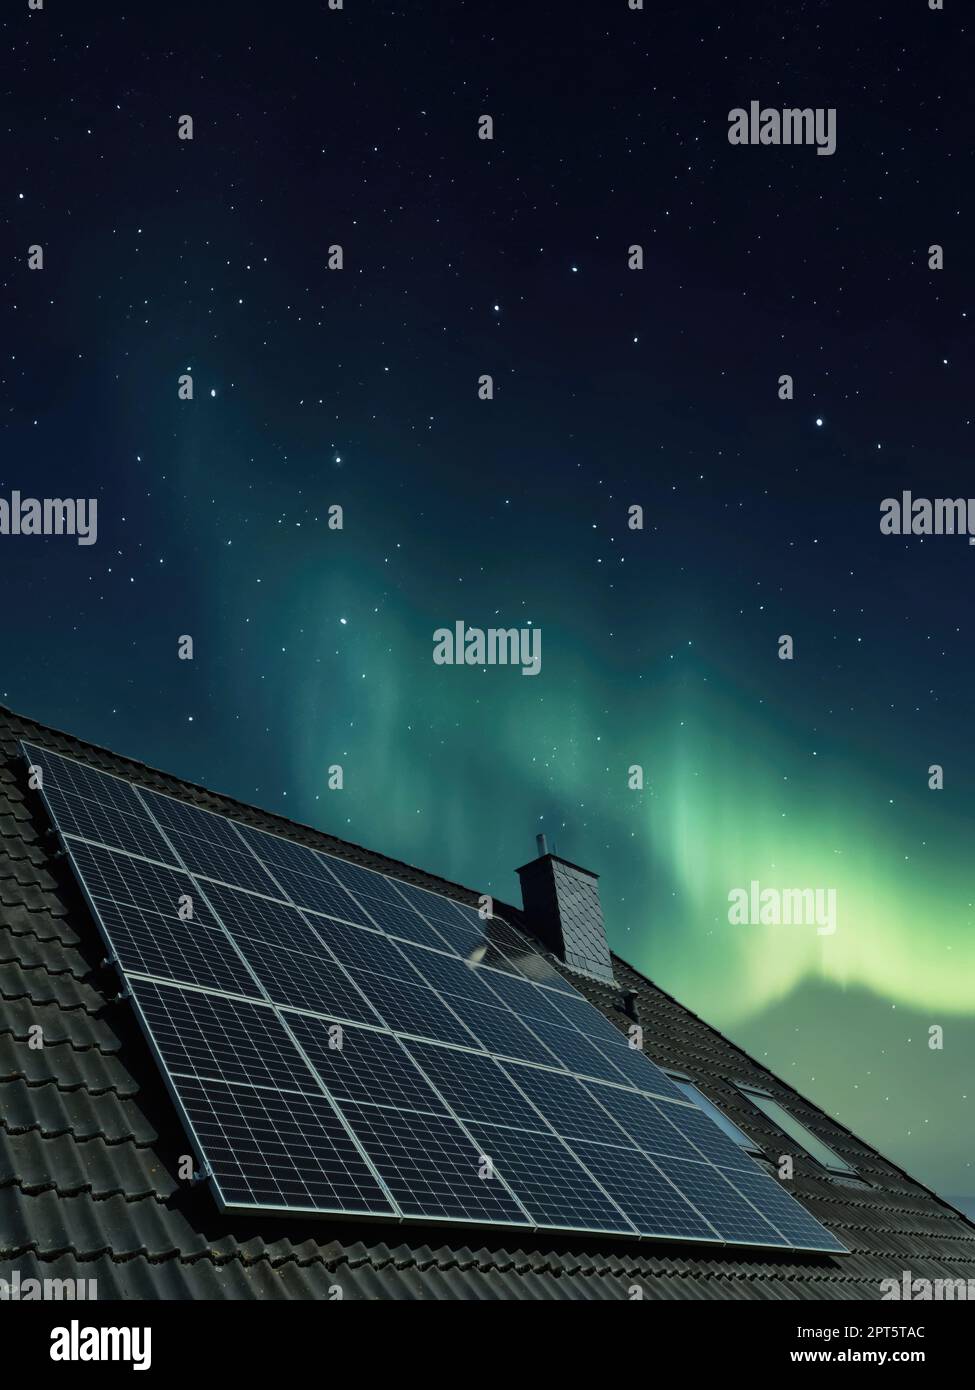 Solar panels producing clean energy on a roof of a residential house with aurora borealis in the background Stock Photo